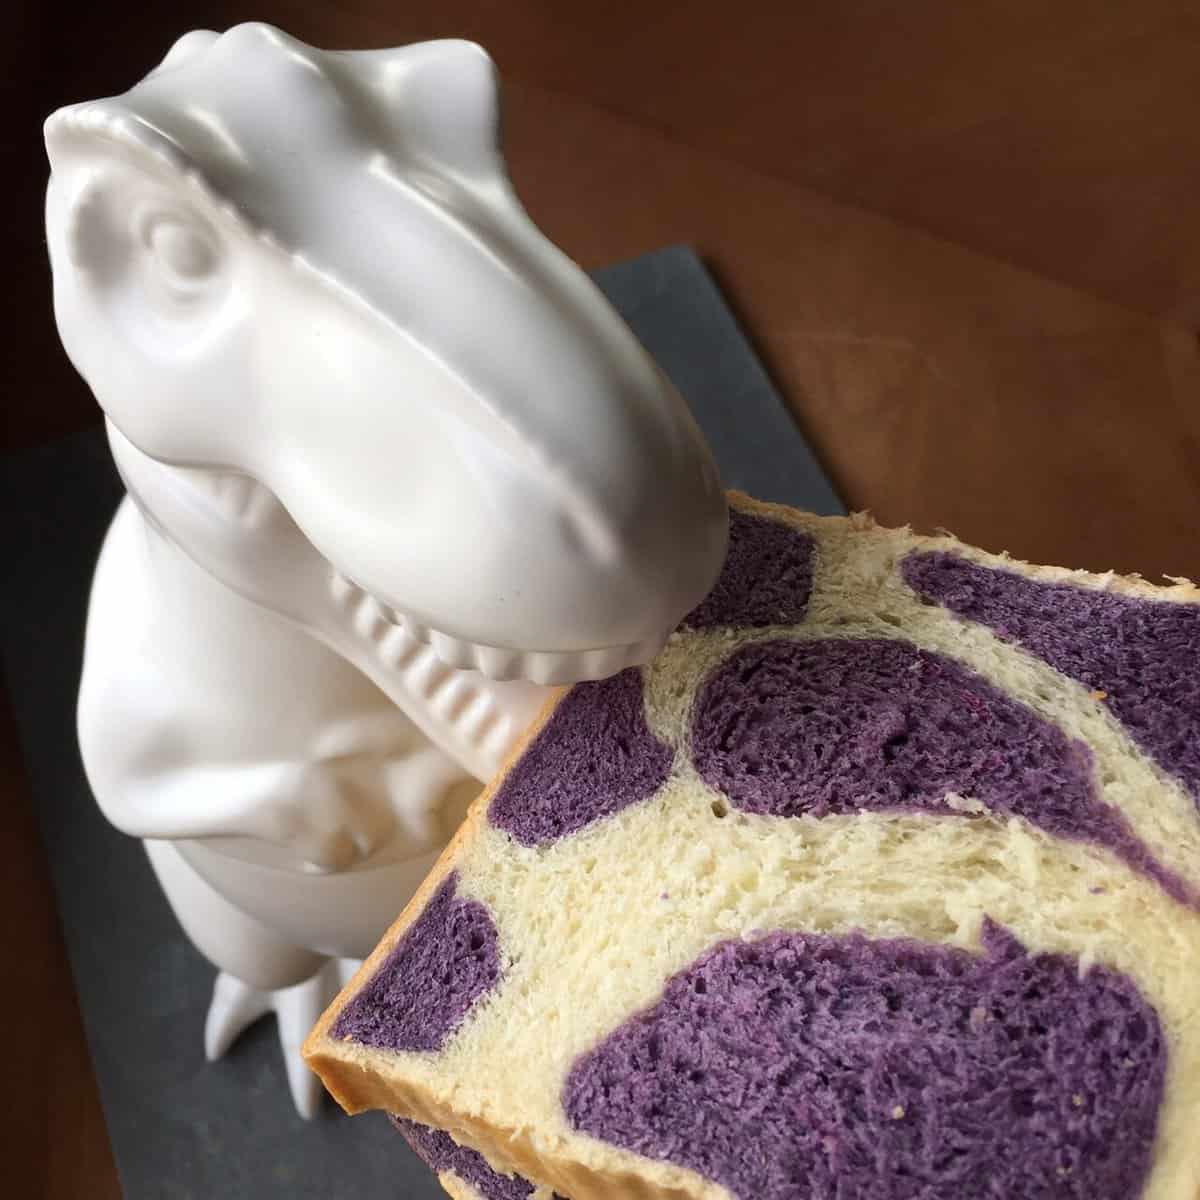 a dinosaur cookie jar eating a square slice of bread with a purple cow print.